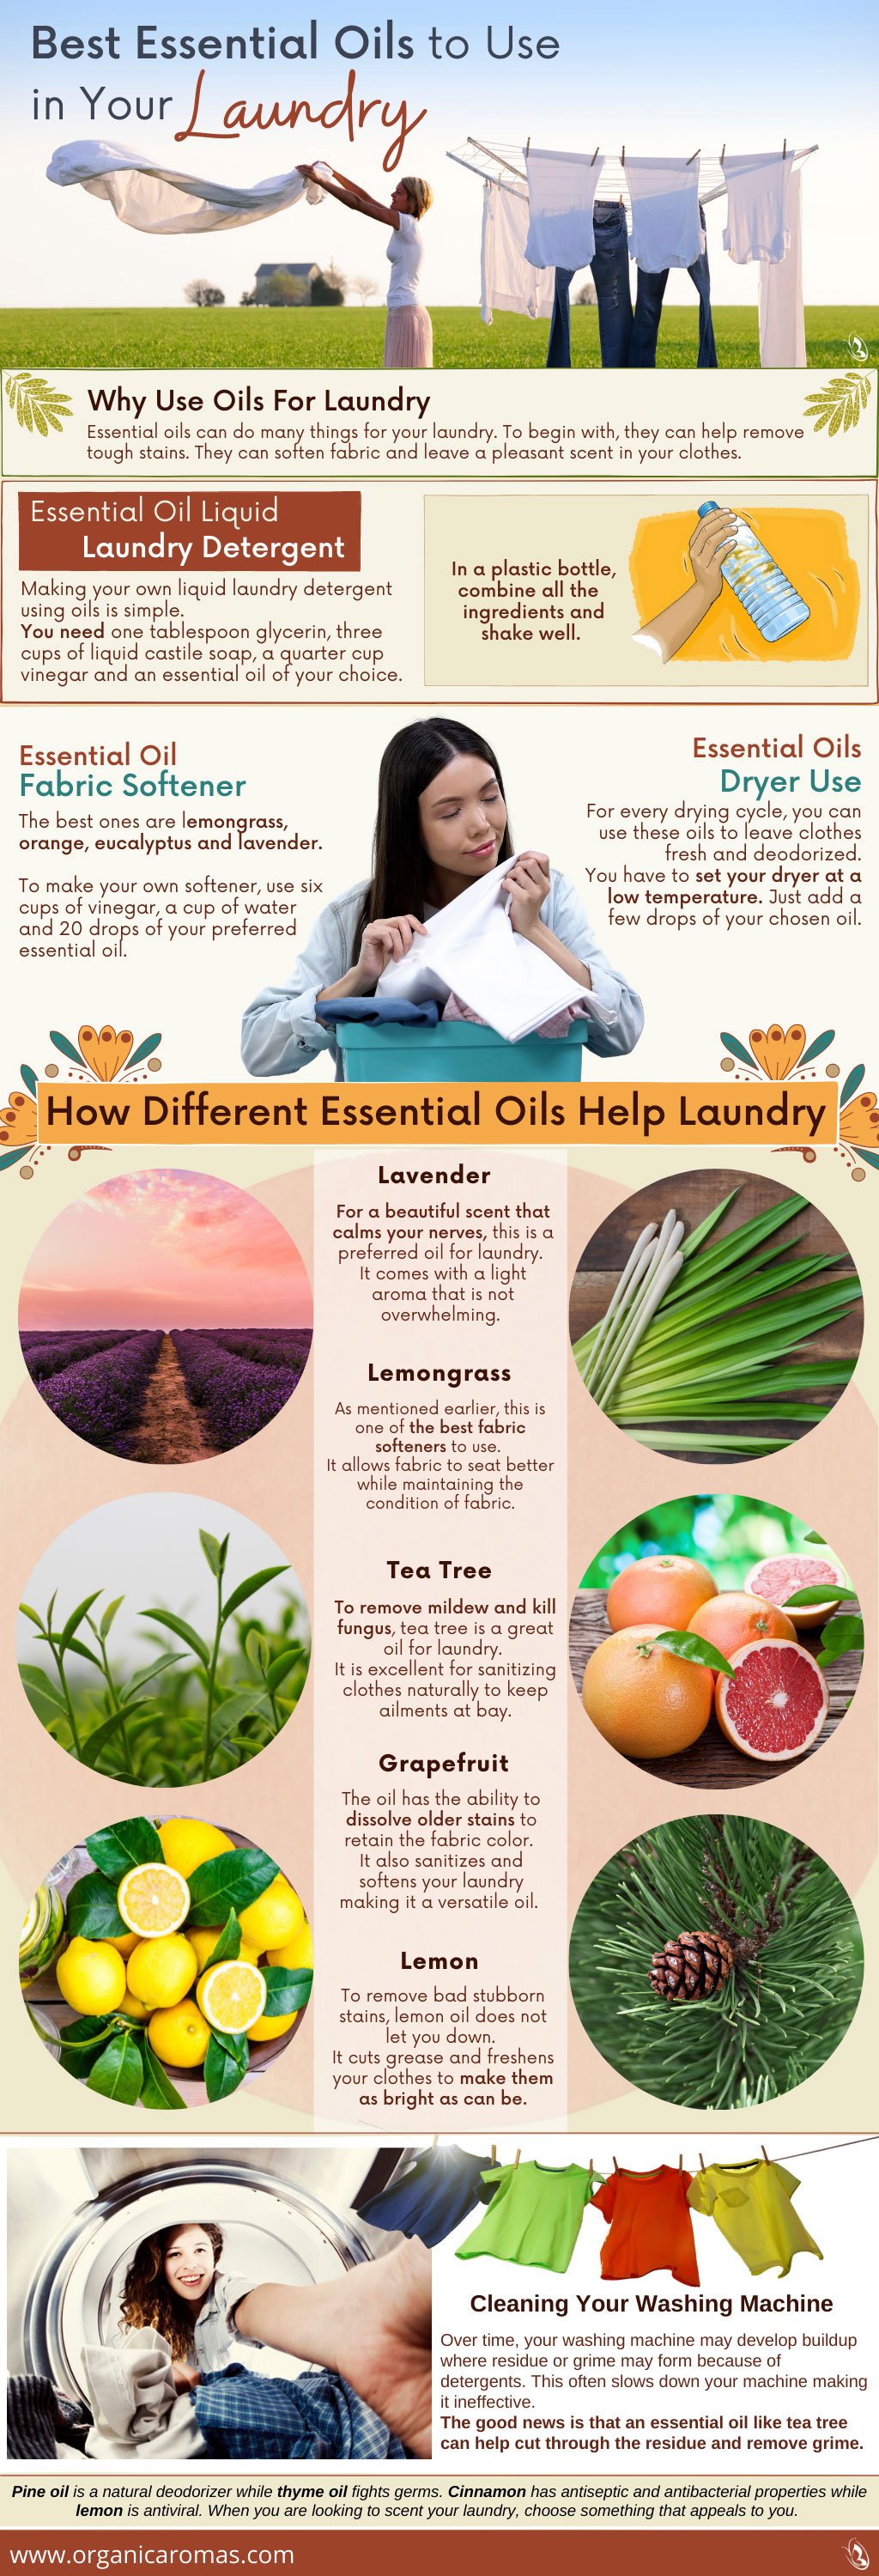 3 Essential Oils to Boost Your Laundry Routine - Roots & Boots